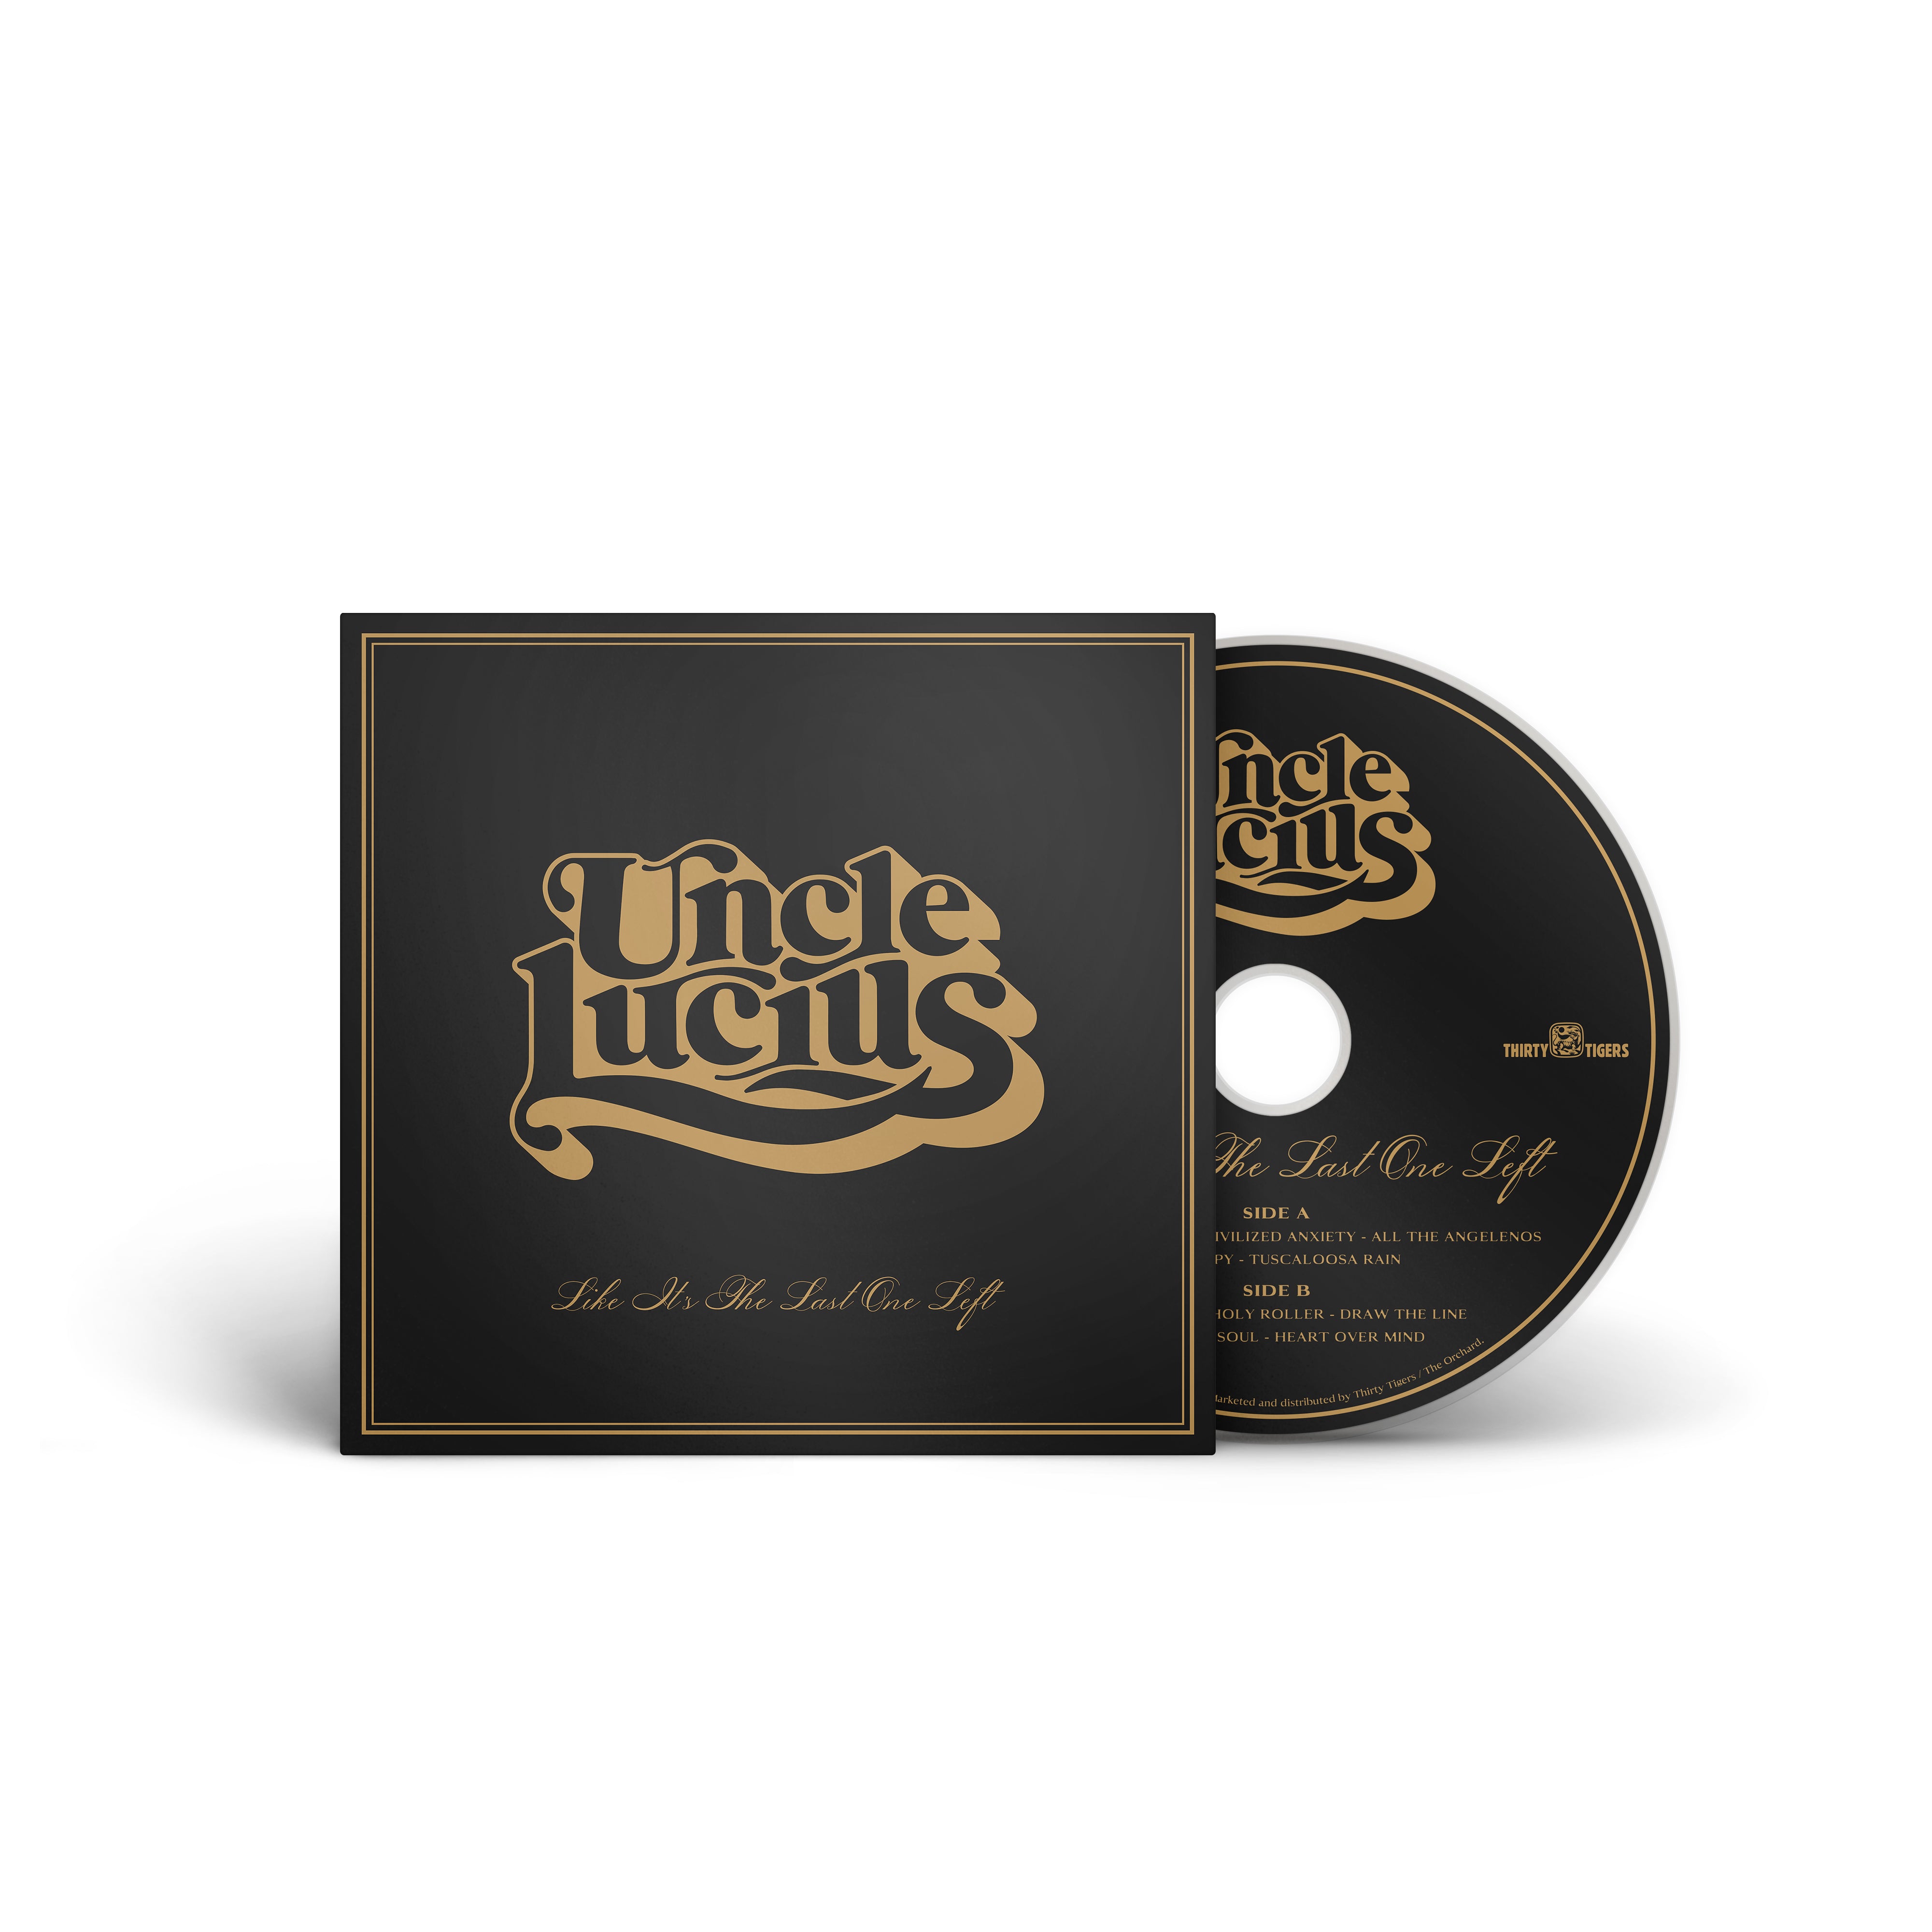 CD's – Uncle Lucius Official Merch Store